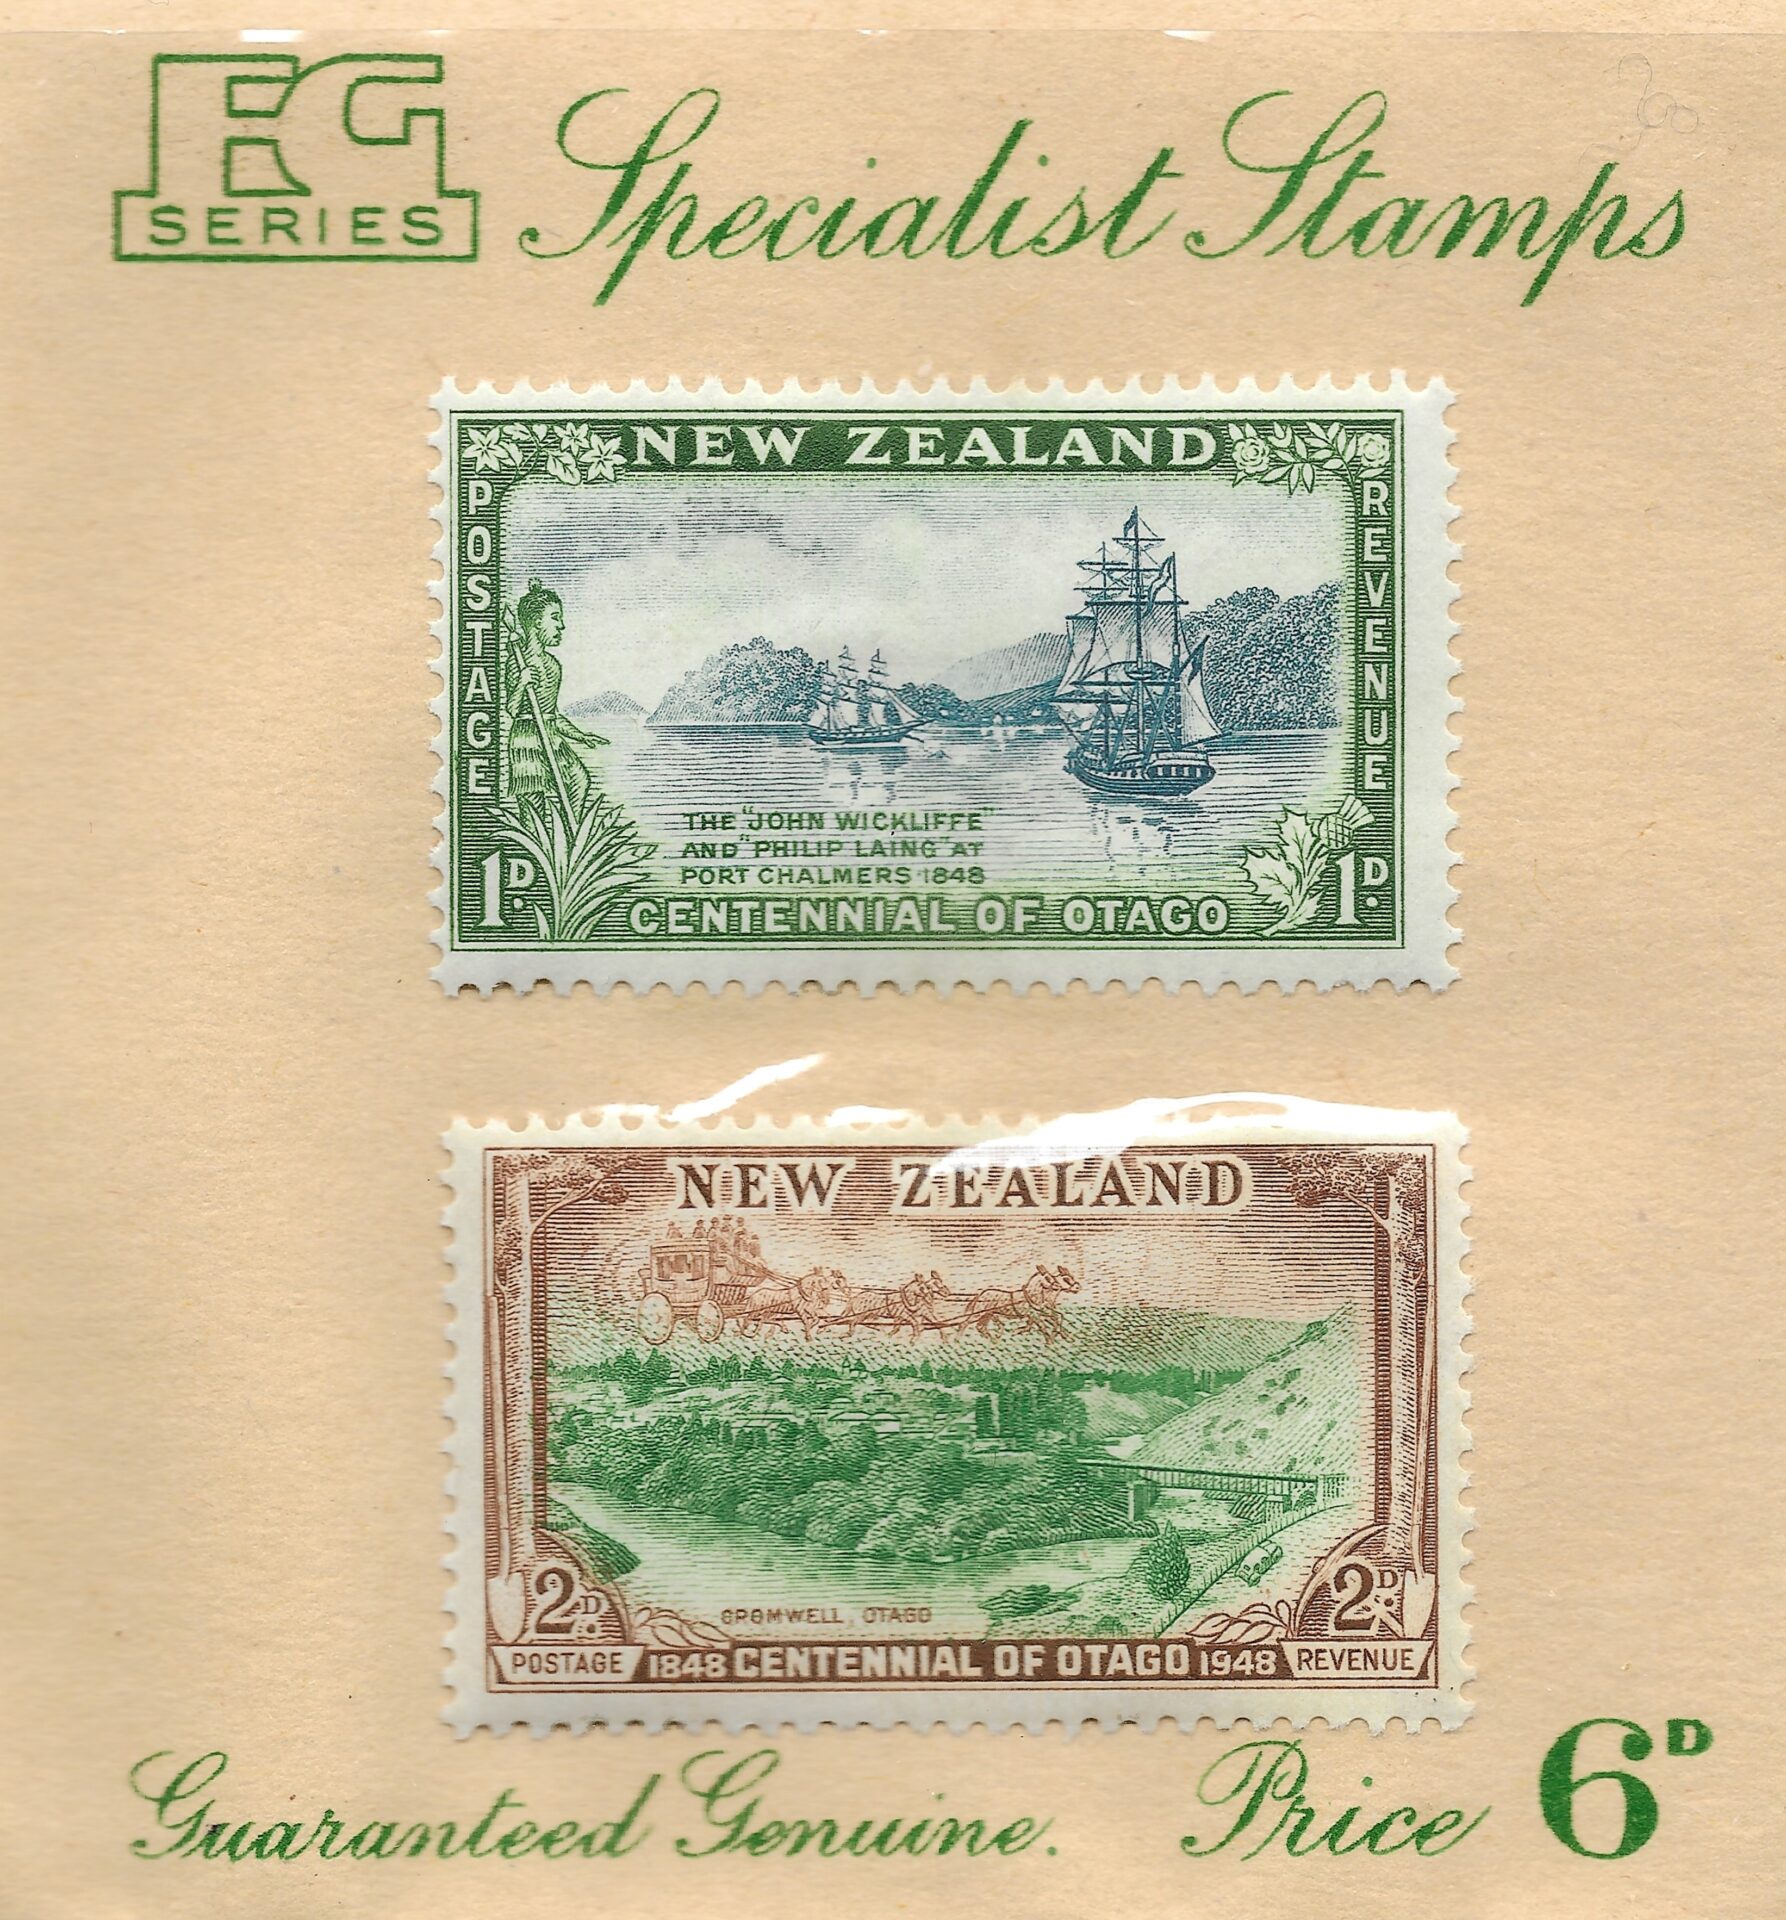 100 Years of Otago, 1948 | Stamp Collecting